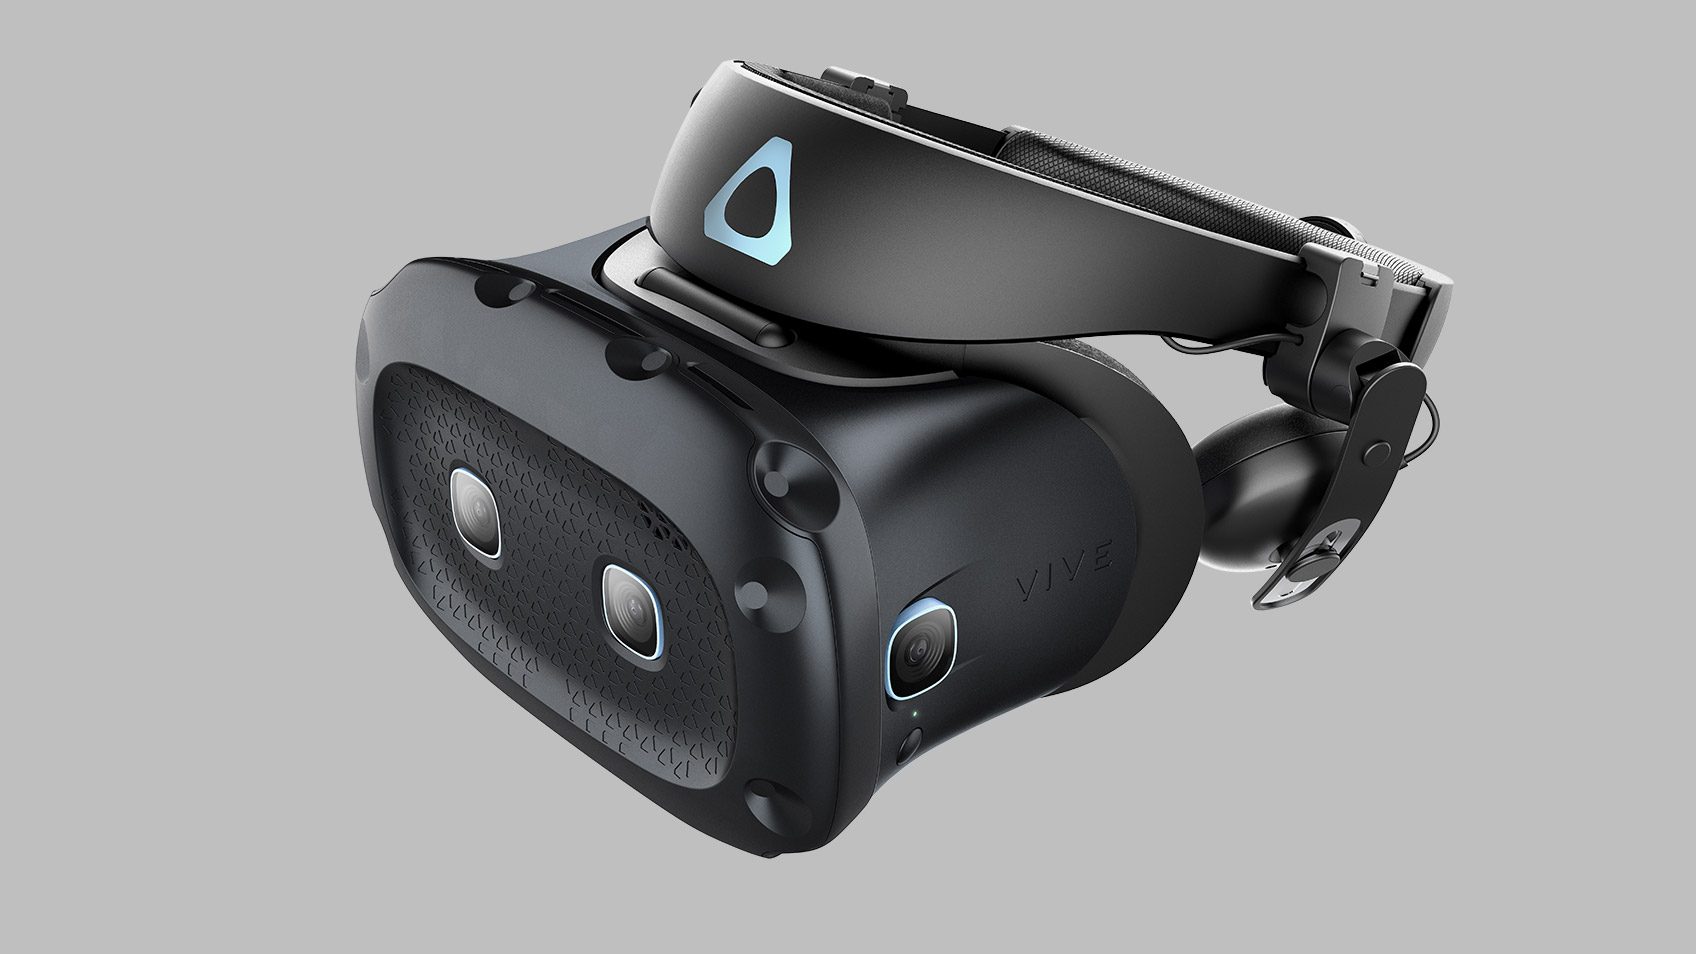 Vive Cosmos Elite Price, Release Date, and Pre-order – Road to VR